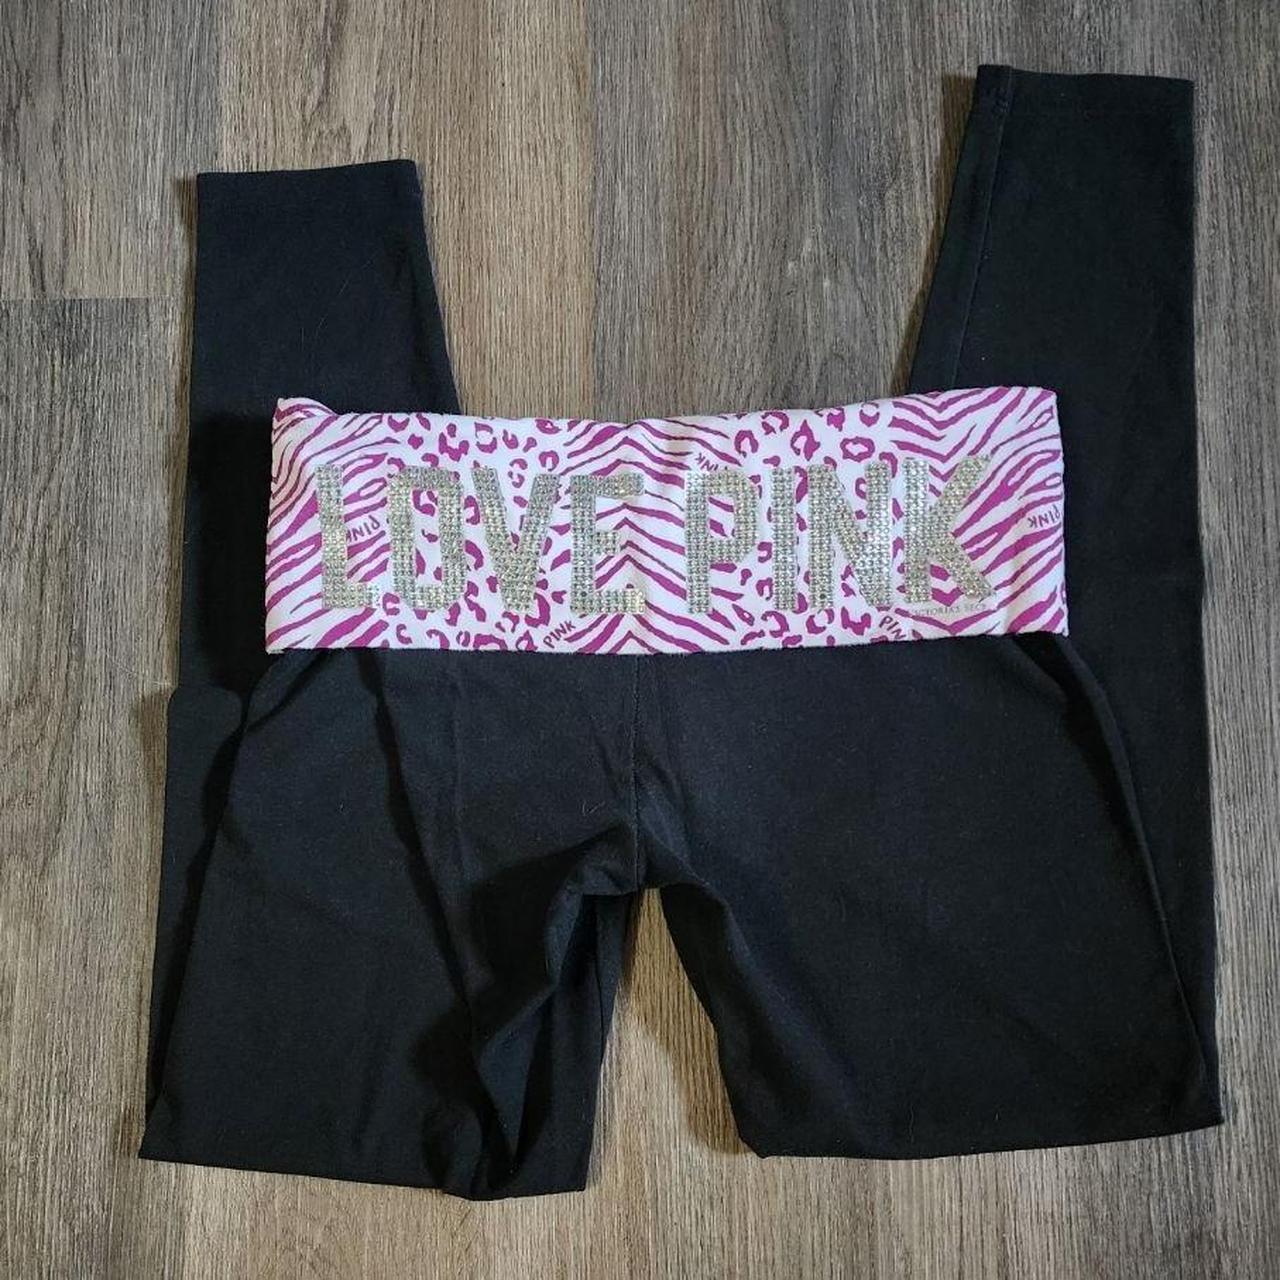 Victoria's Secret BLING Foldover Yoga Pants - $64 - From Alexis